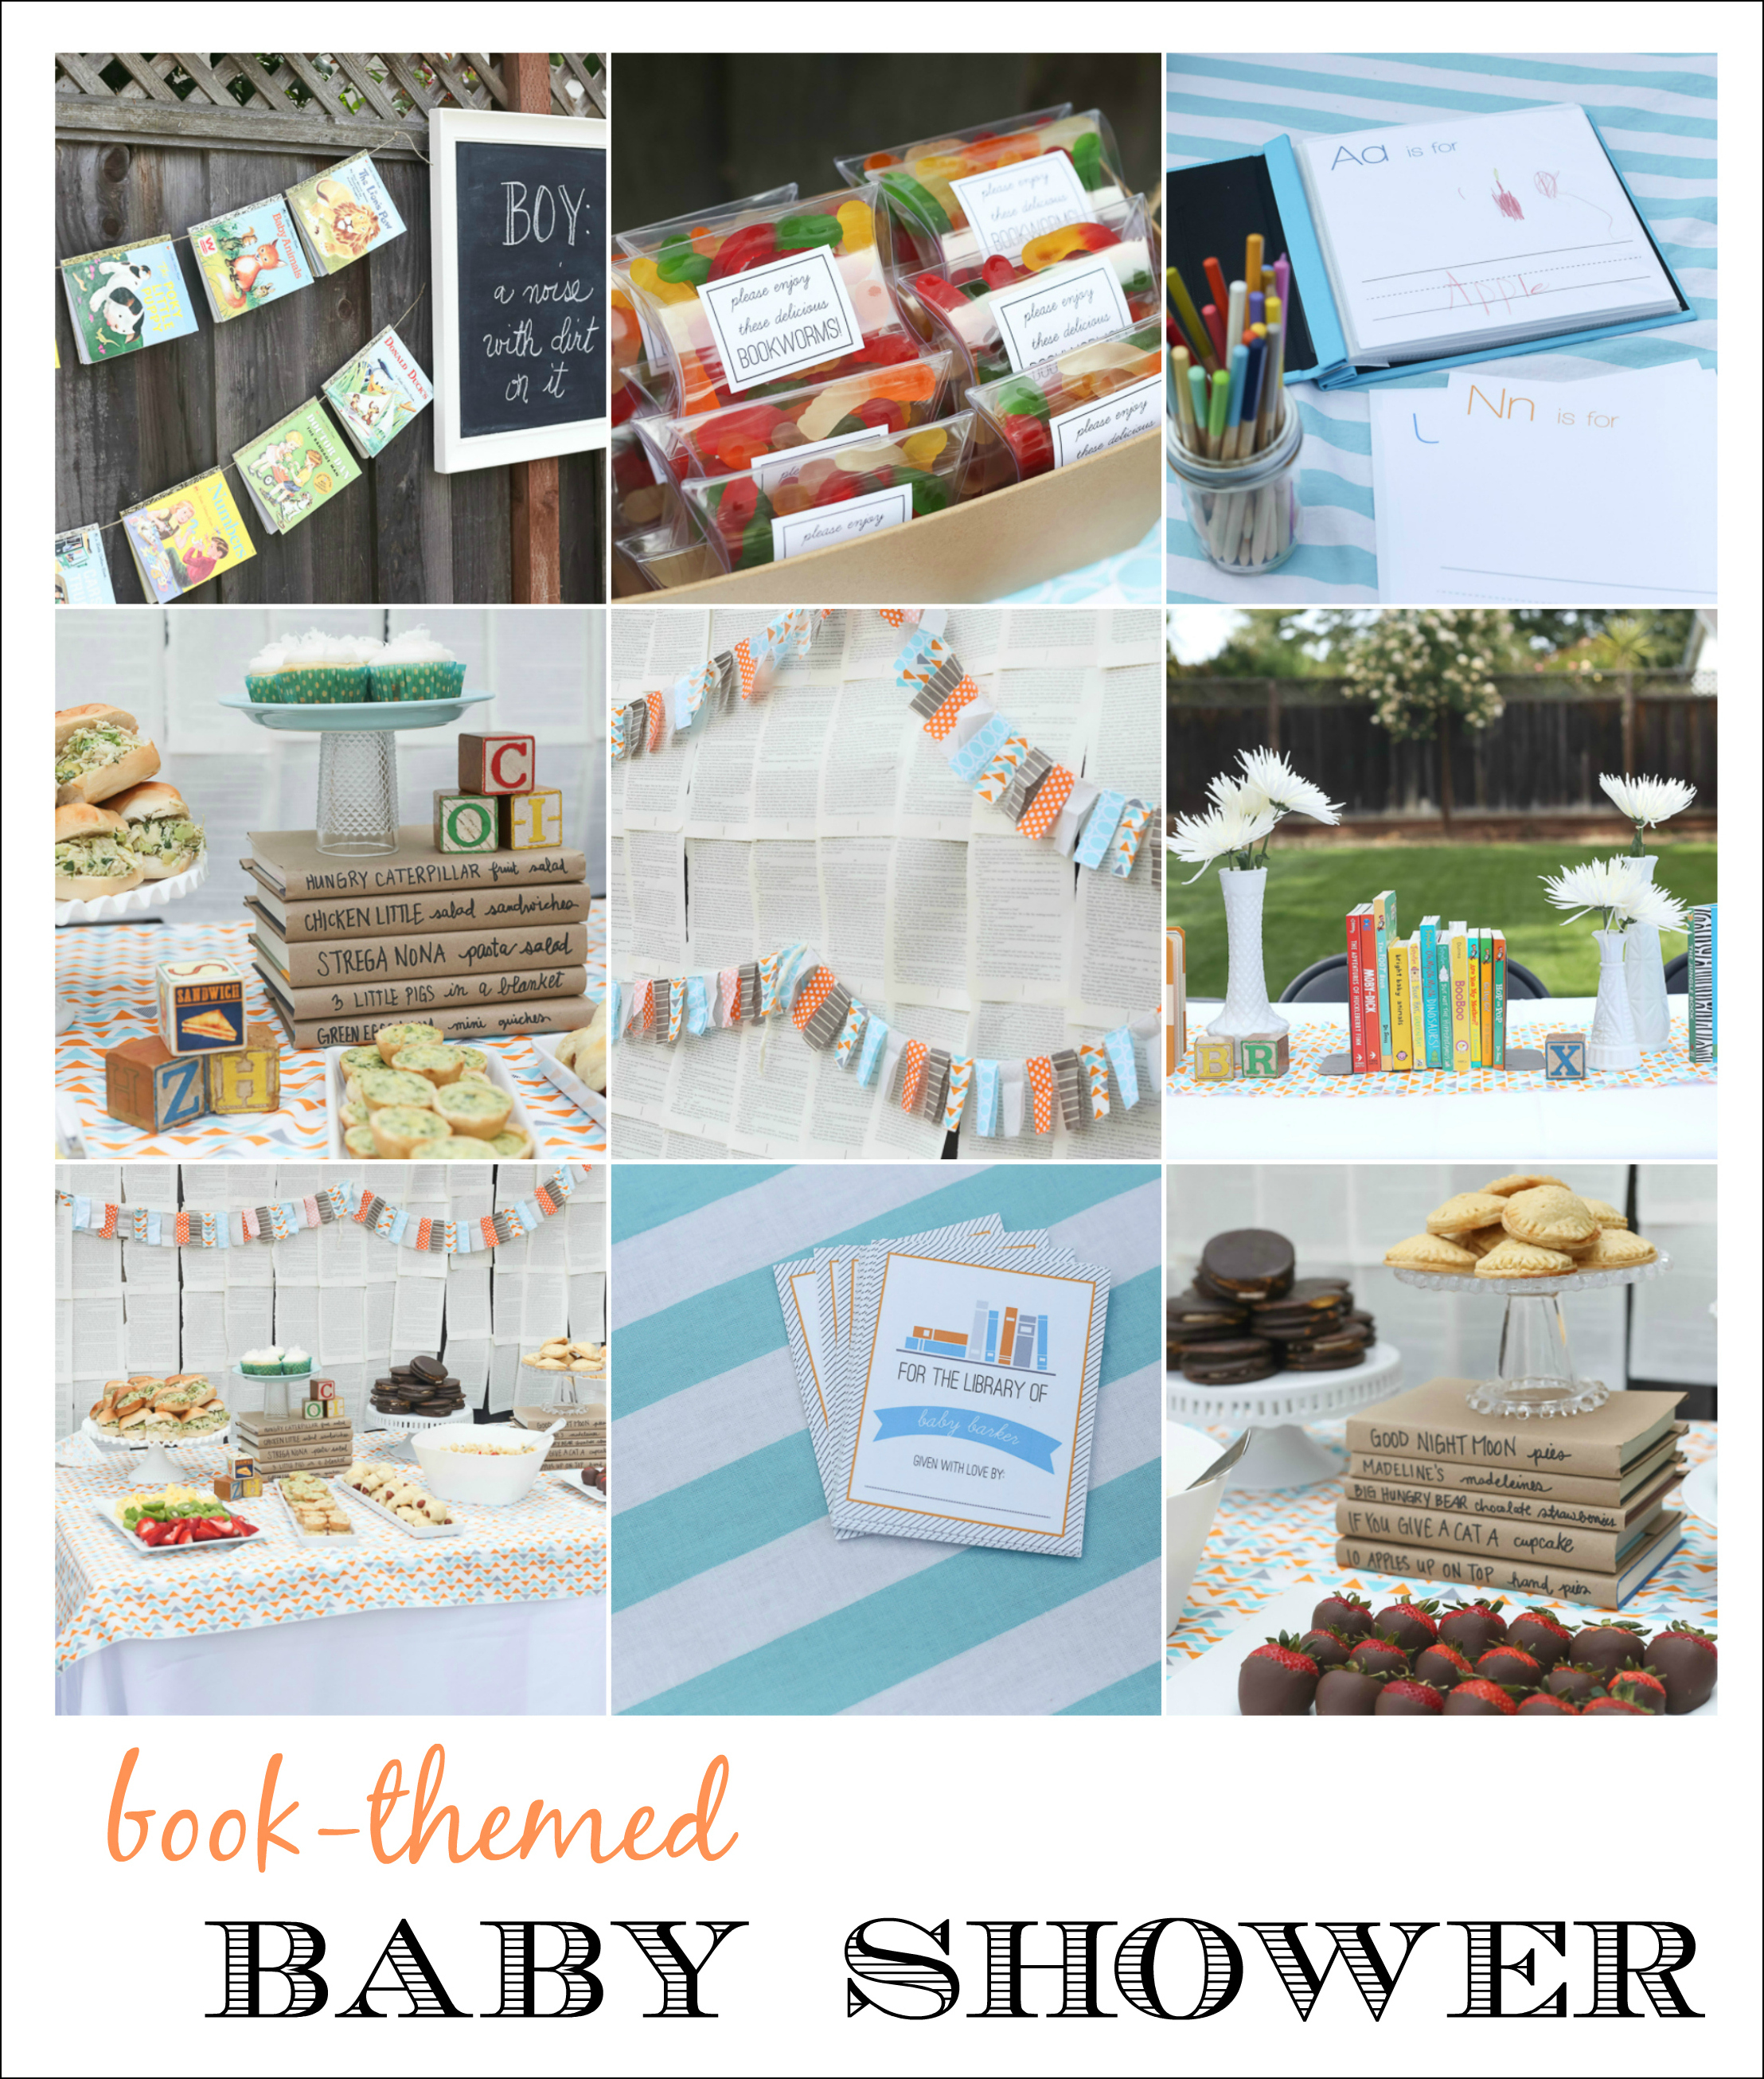 Book Baby Shower (And Free Printables!) - Free Printable Book Themed Baby Shower Invitations